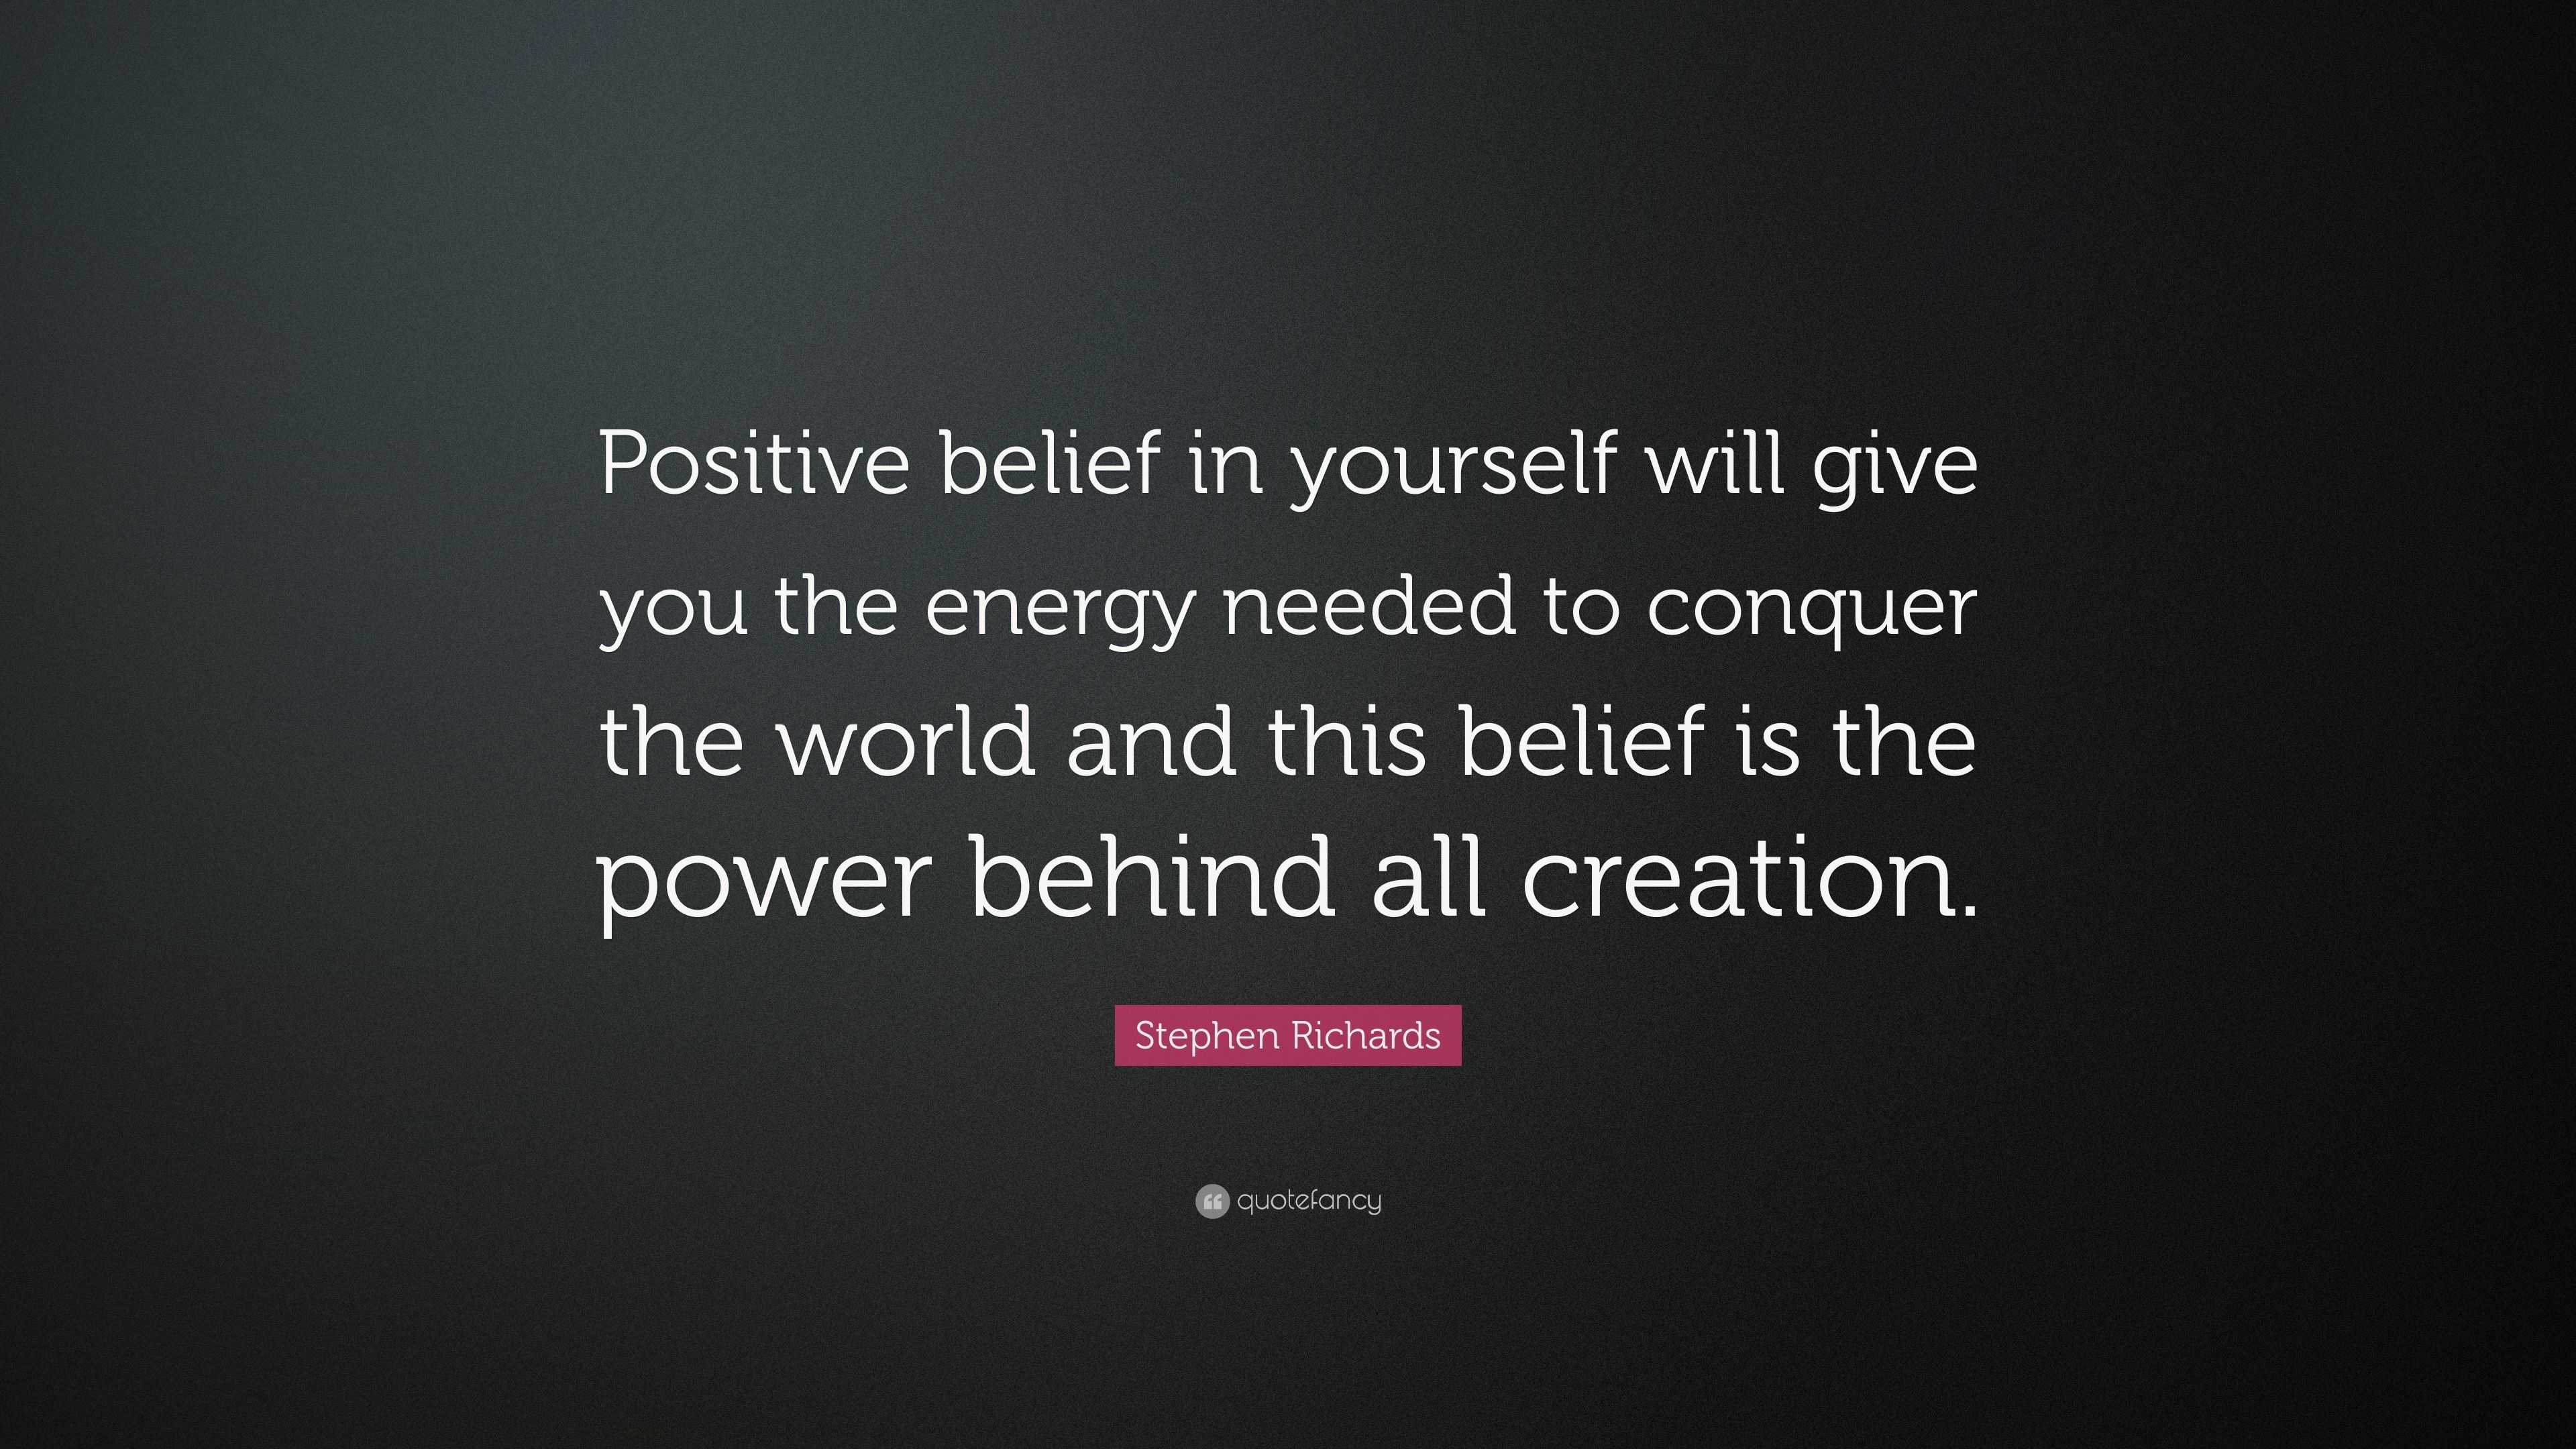 Stephen Richards Quote: “Positive belief in yourself will give you the ...